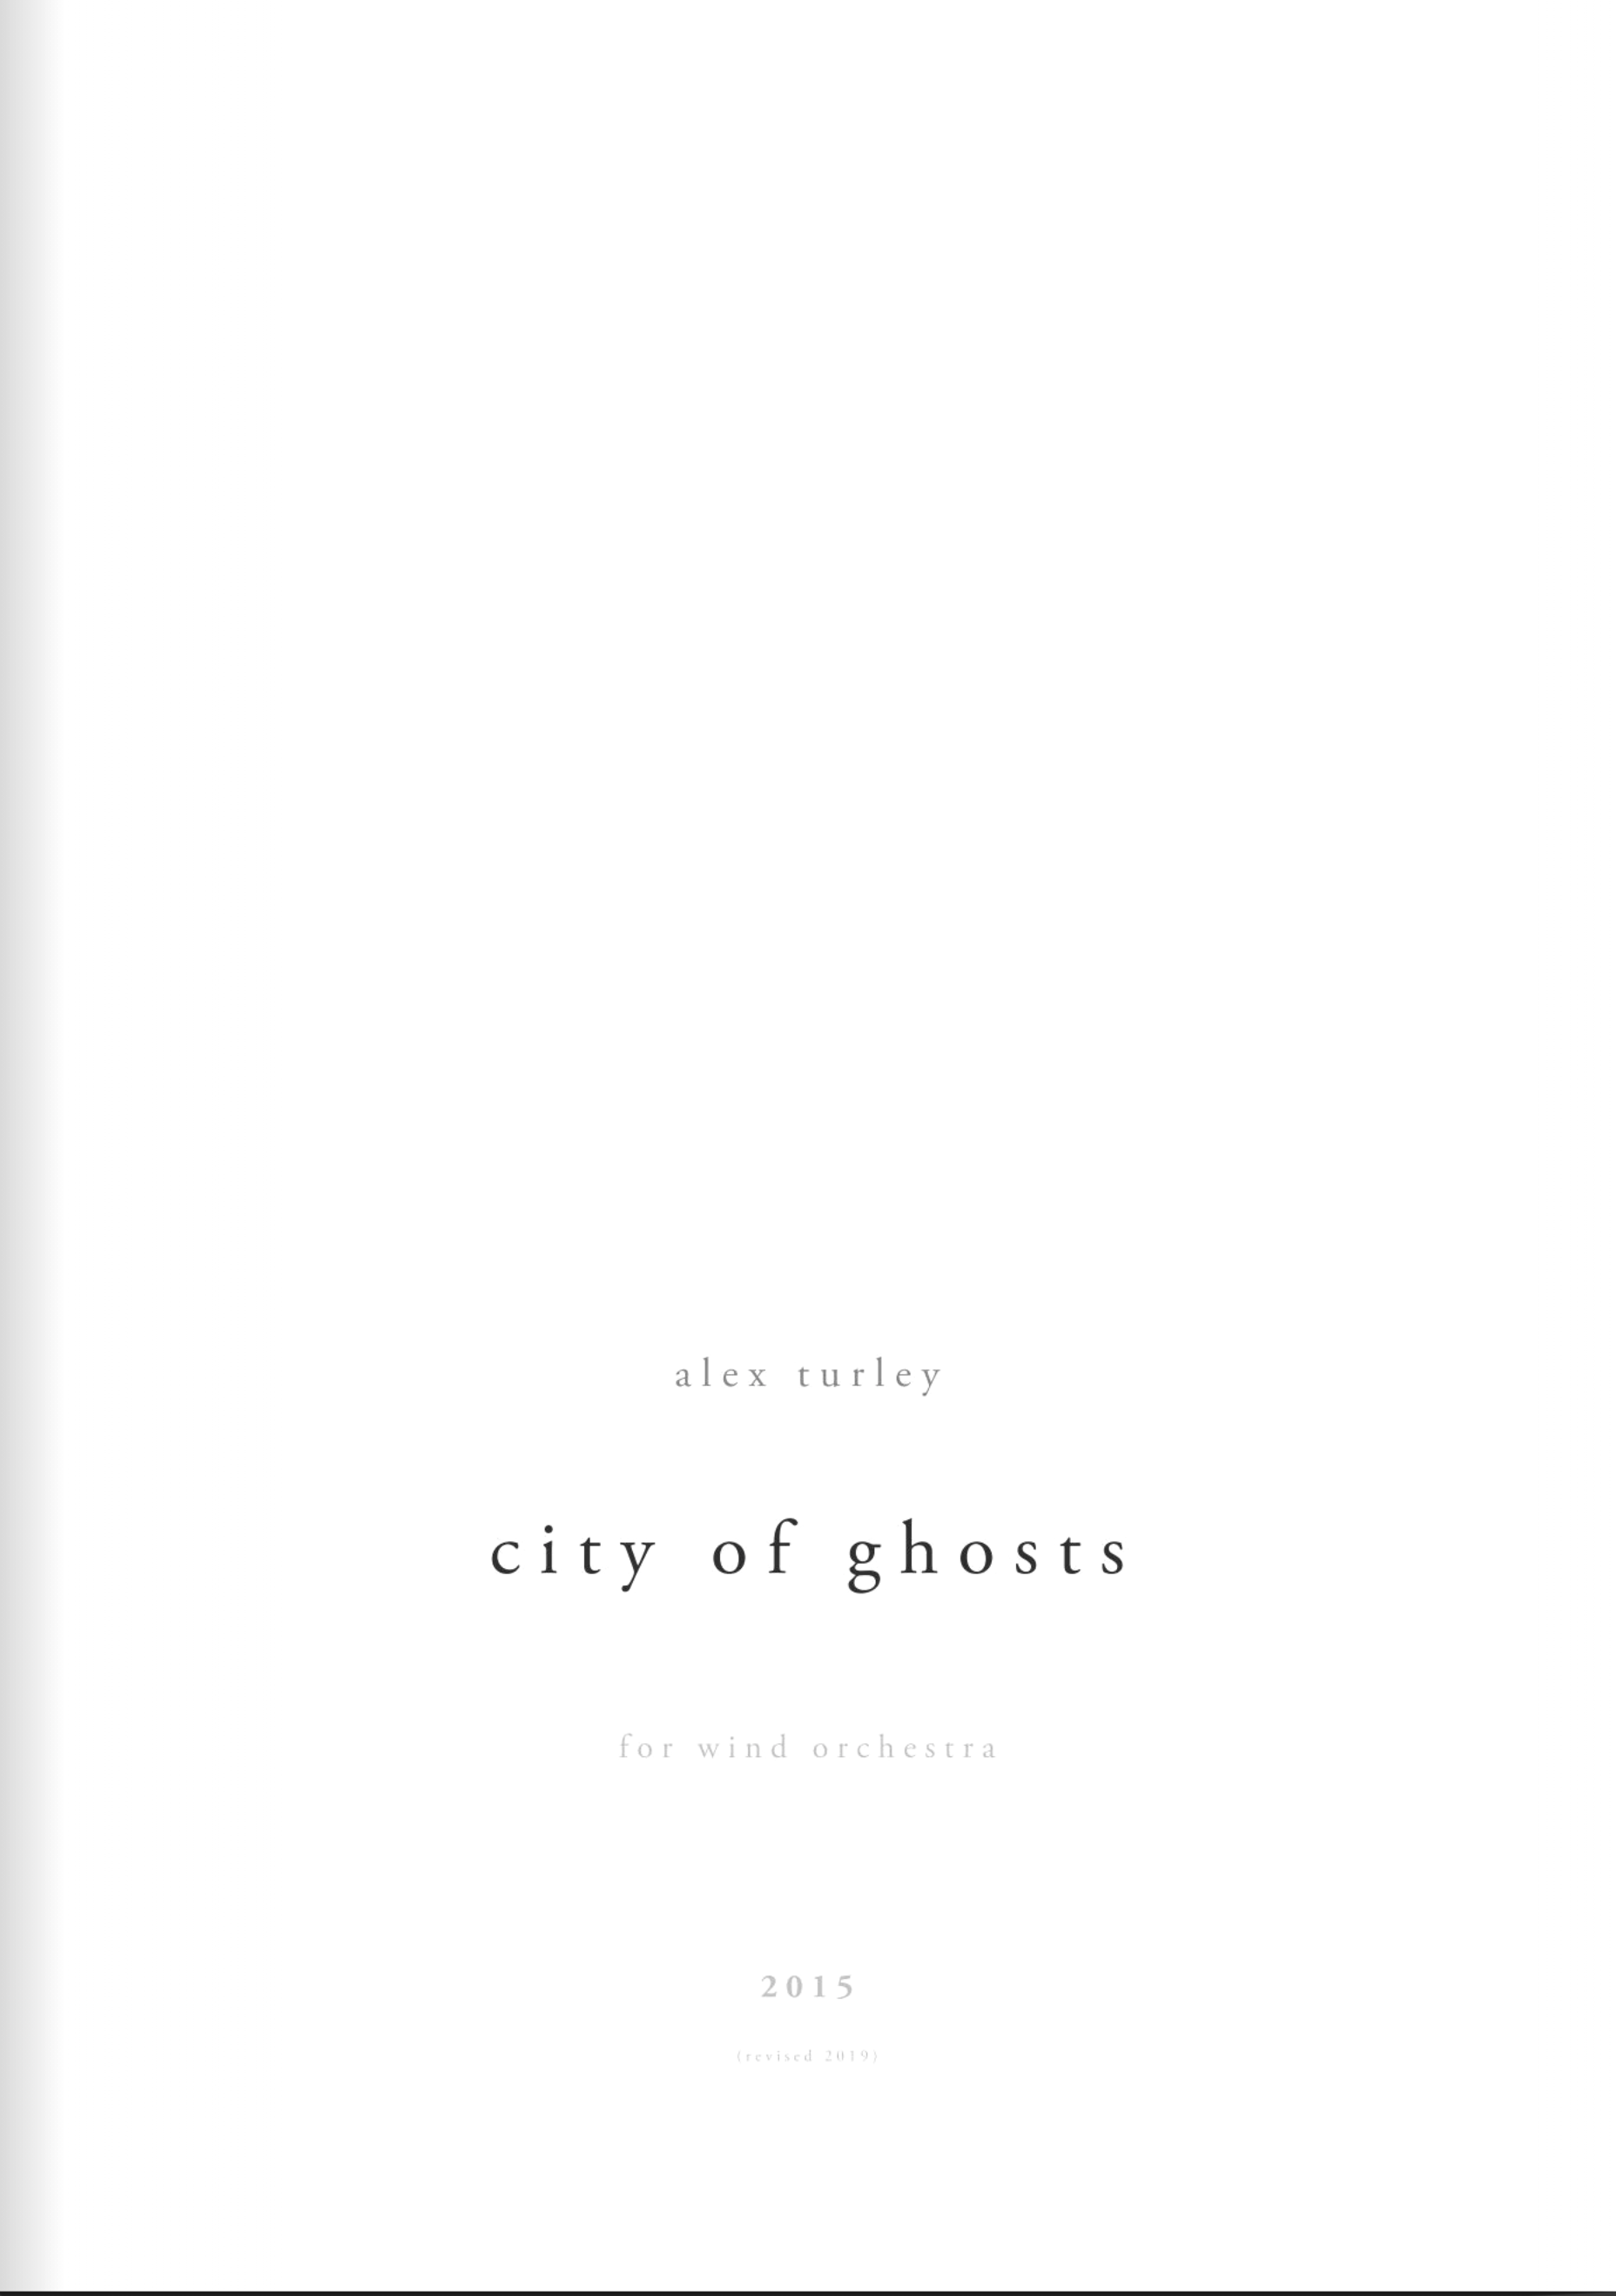 City Of Ghosts by Alex Turley